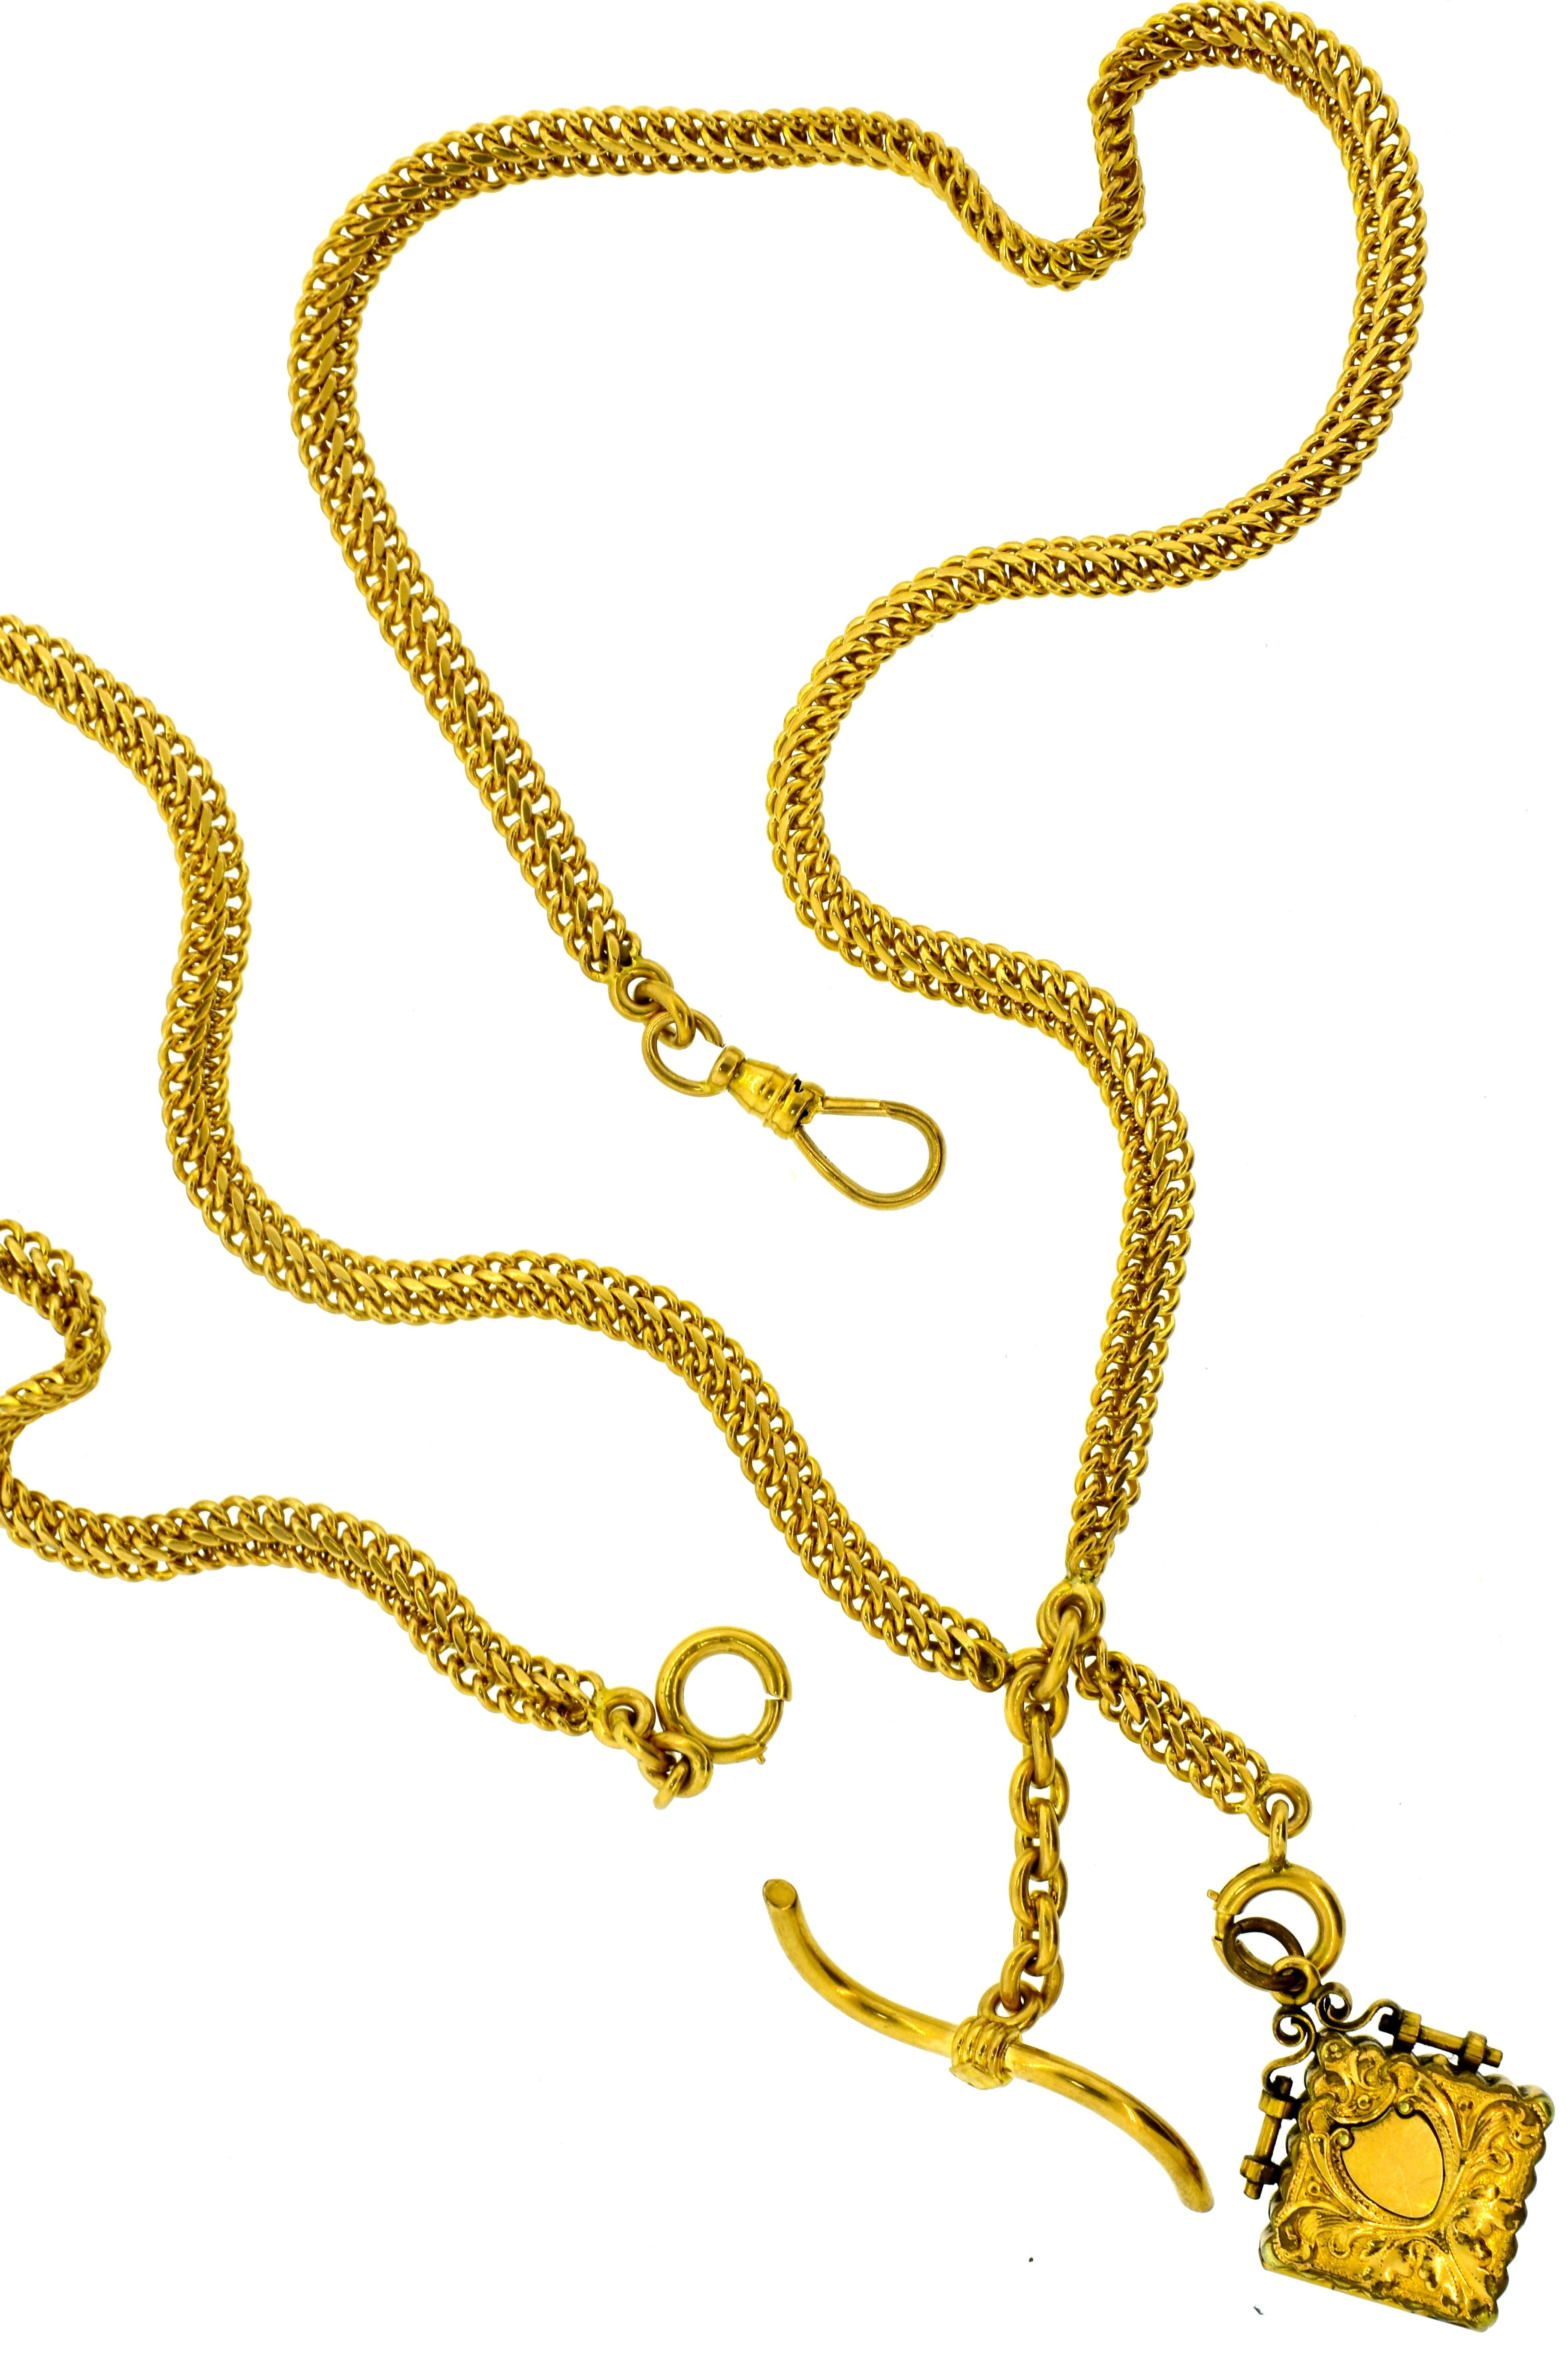 Women's or Men's Antique Gold Chain with Fobs, circa 1900